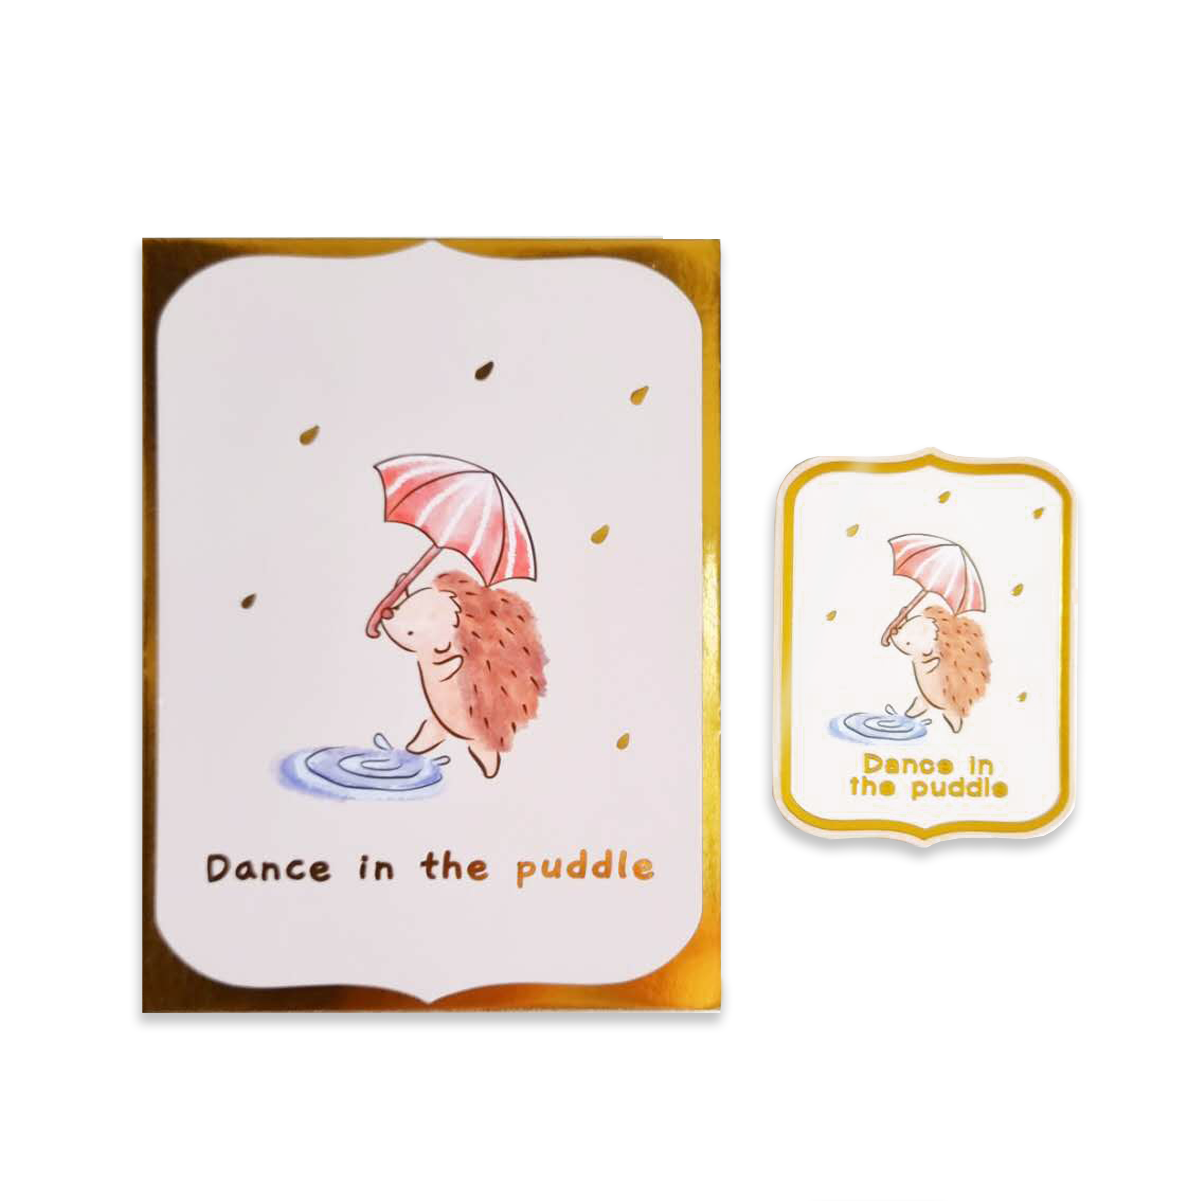 'Dance in the Puddle' Postcard & Sticker